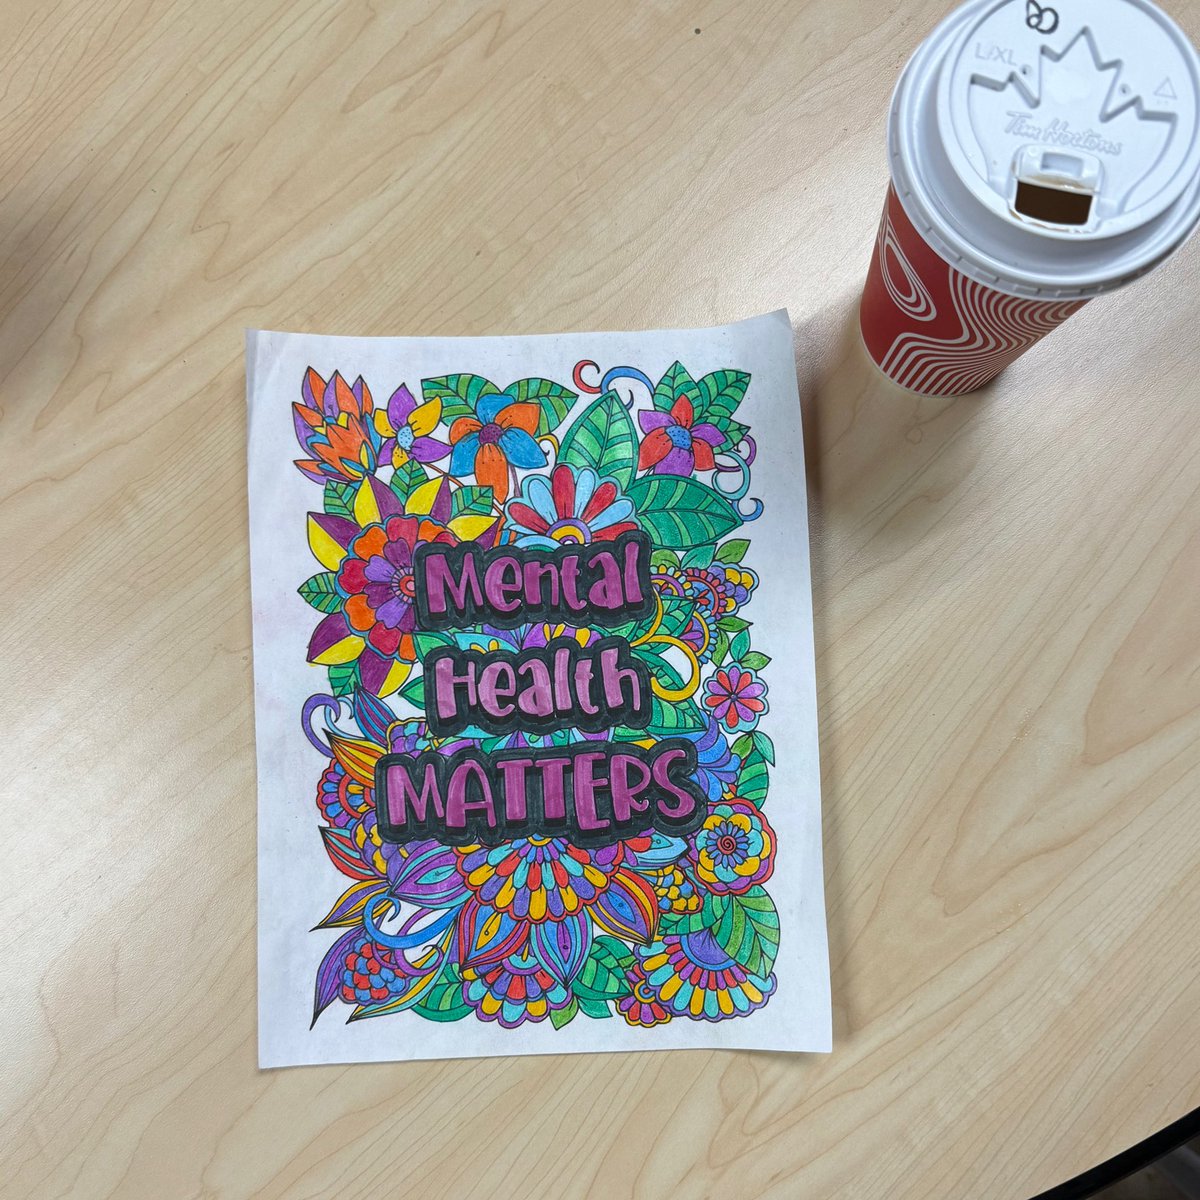 Happy Weekend everyone! 🤗💖 I have been colouring, on Twitter and drinking coffee… Here is one of my completed art pieces… It is “Mental Health Matters.” 🤗💖

みなさん、良い週末を！🤗💖…